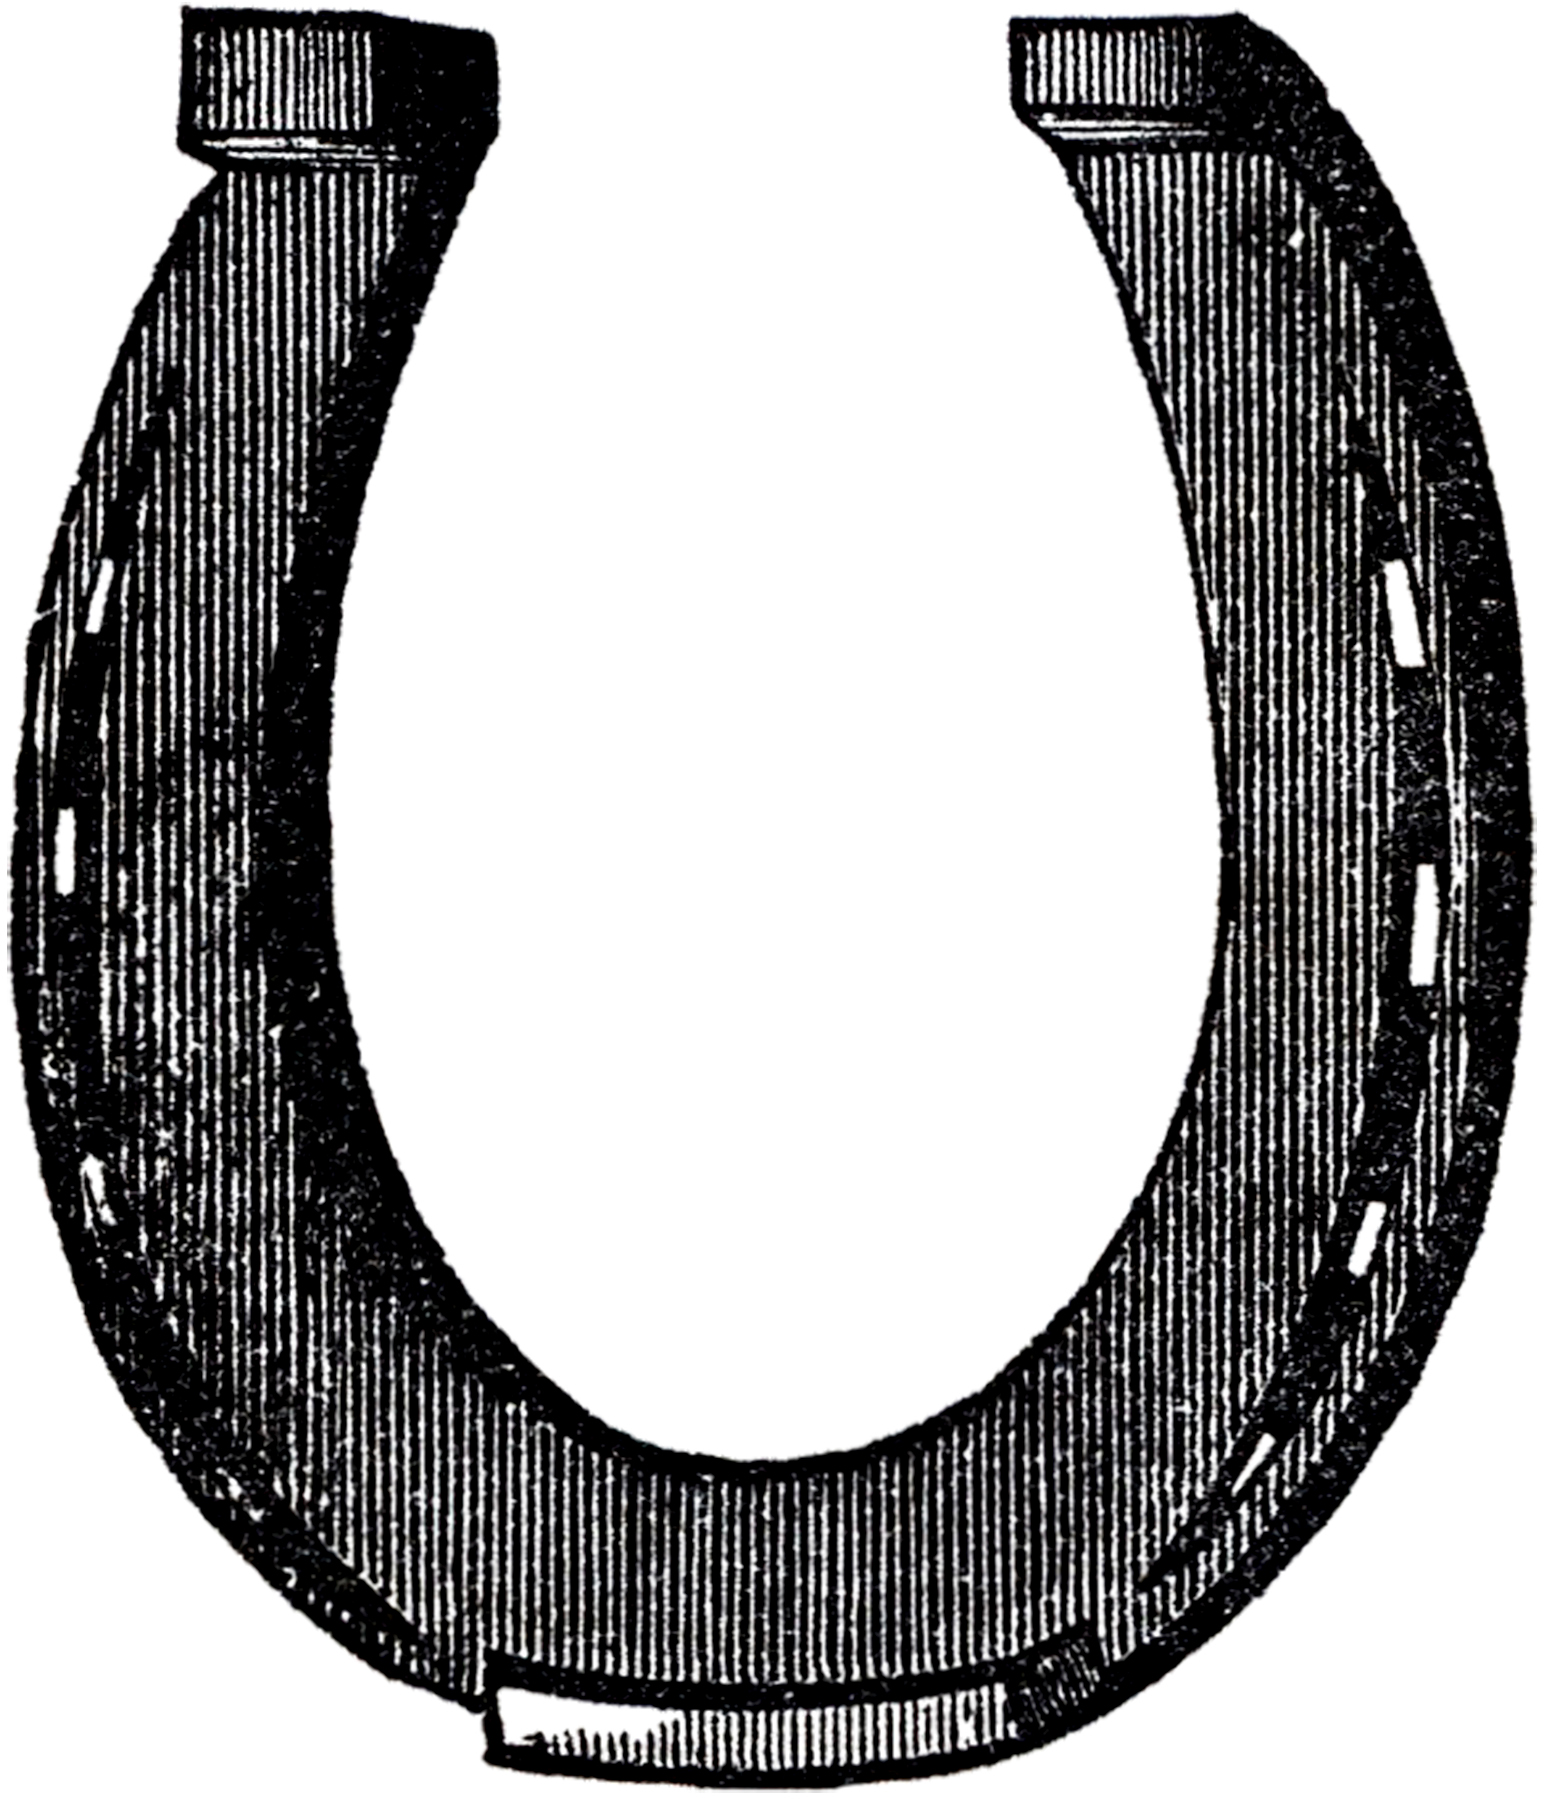 Free Horseshoe Cliparts, Download Free Clip Art, Free Clip.